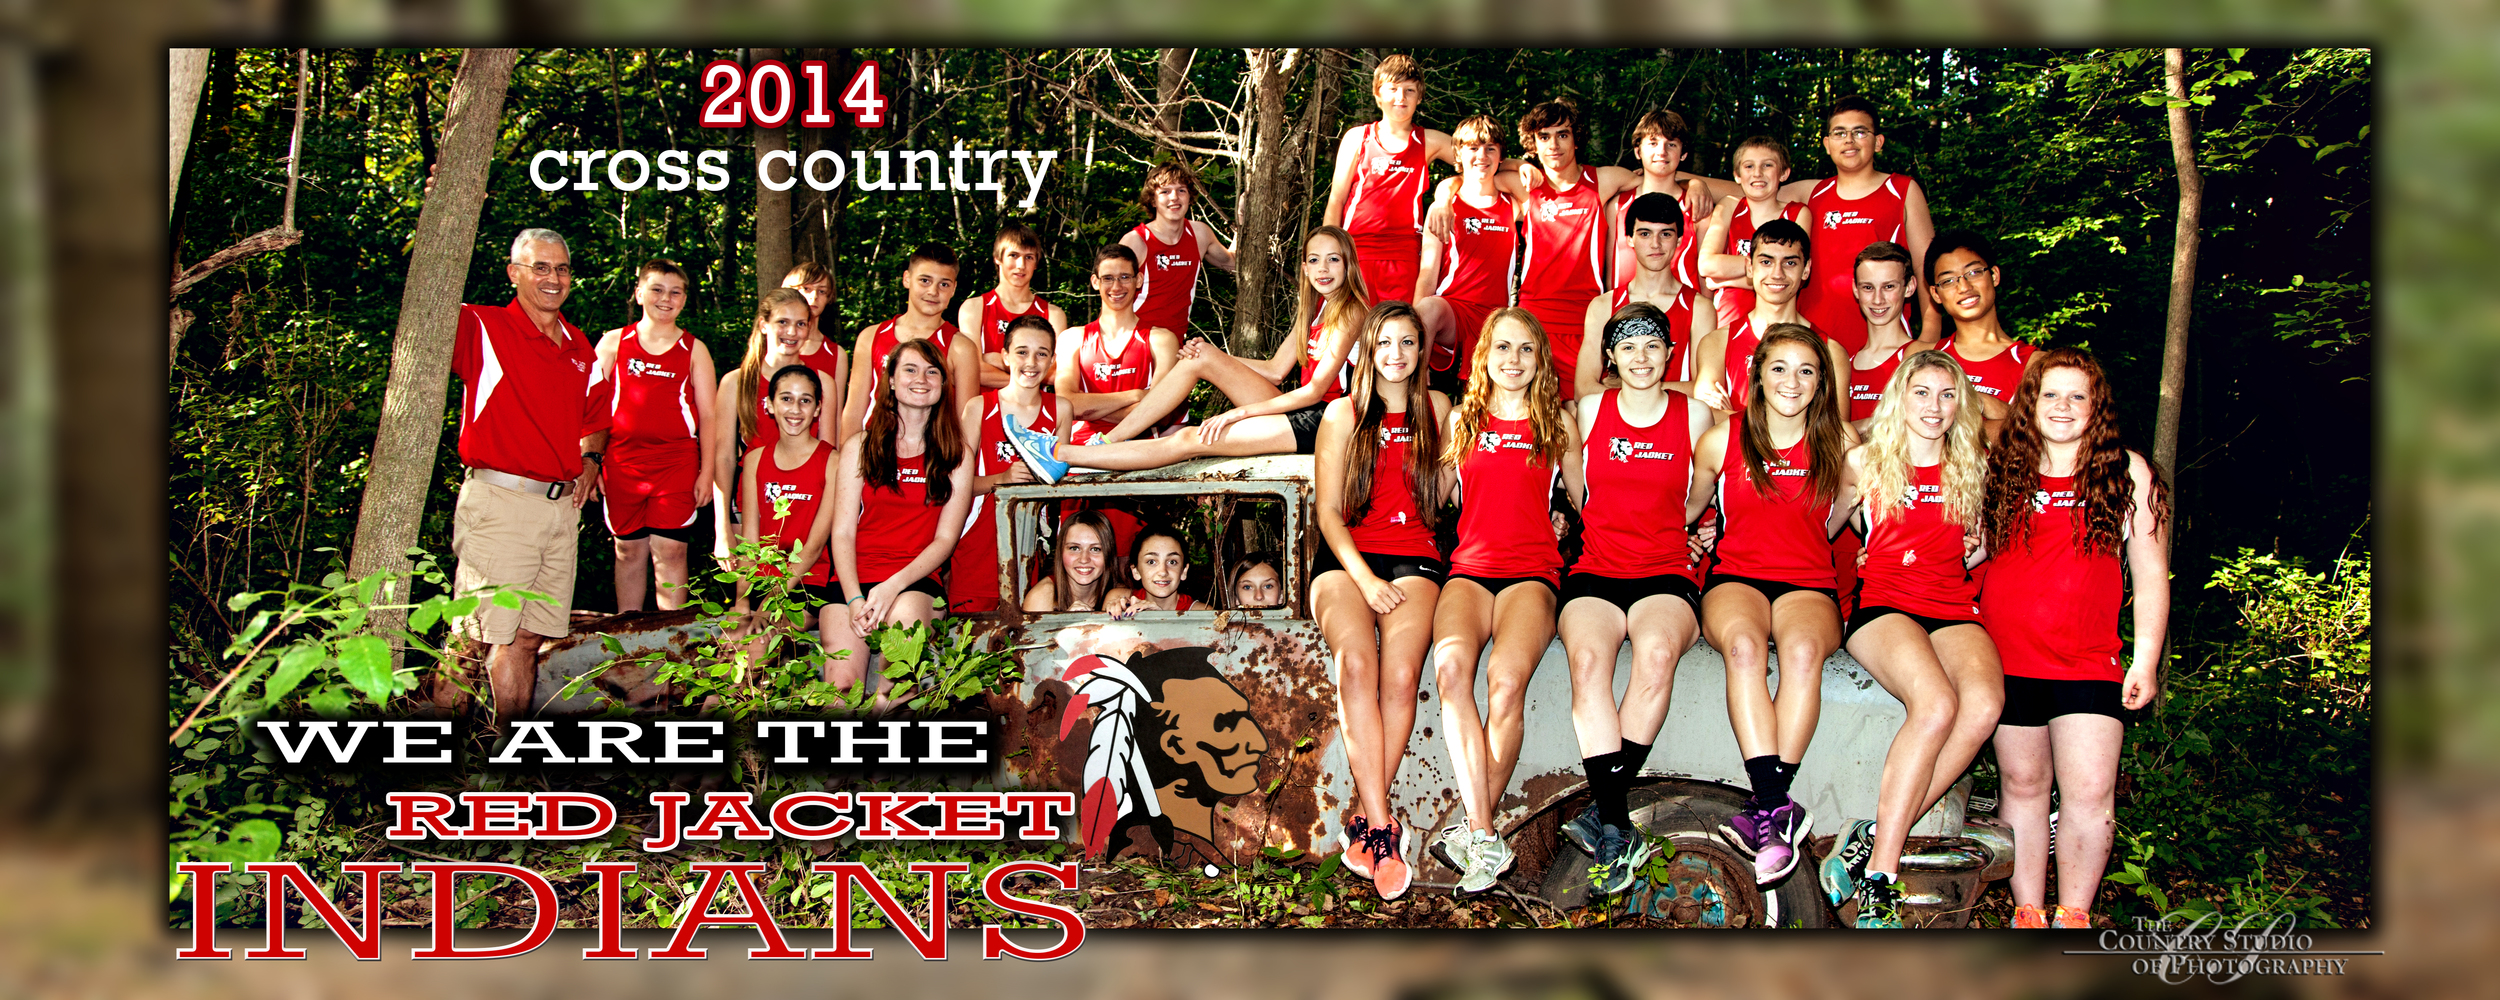 xcountry_poster.jpg